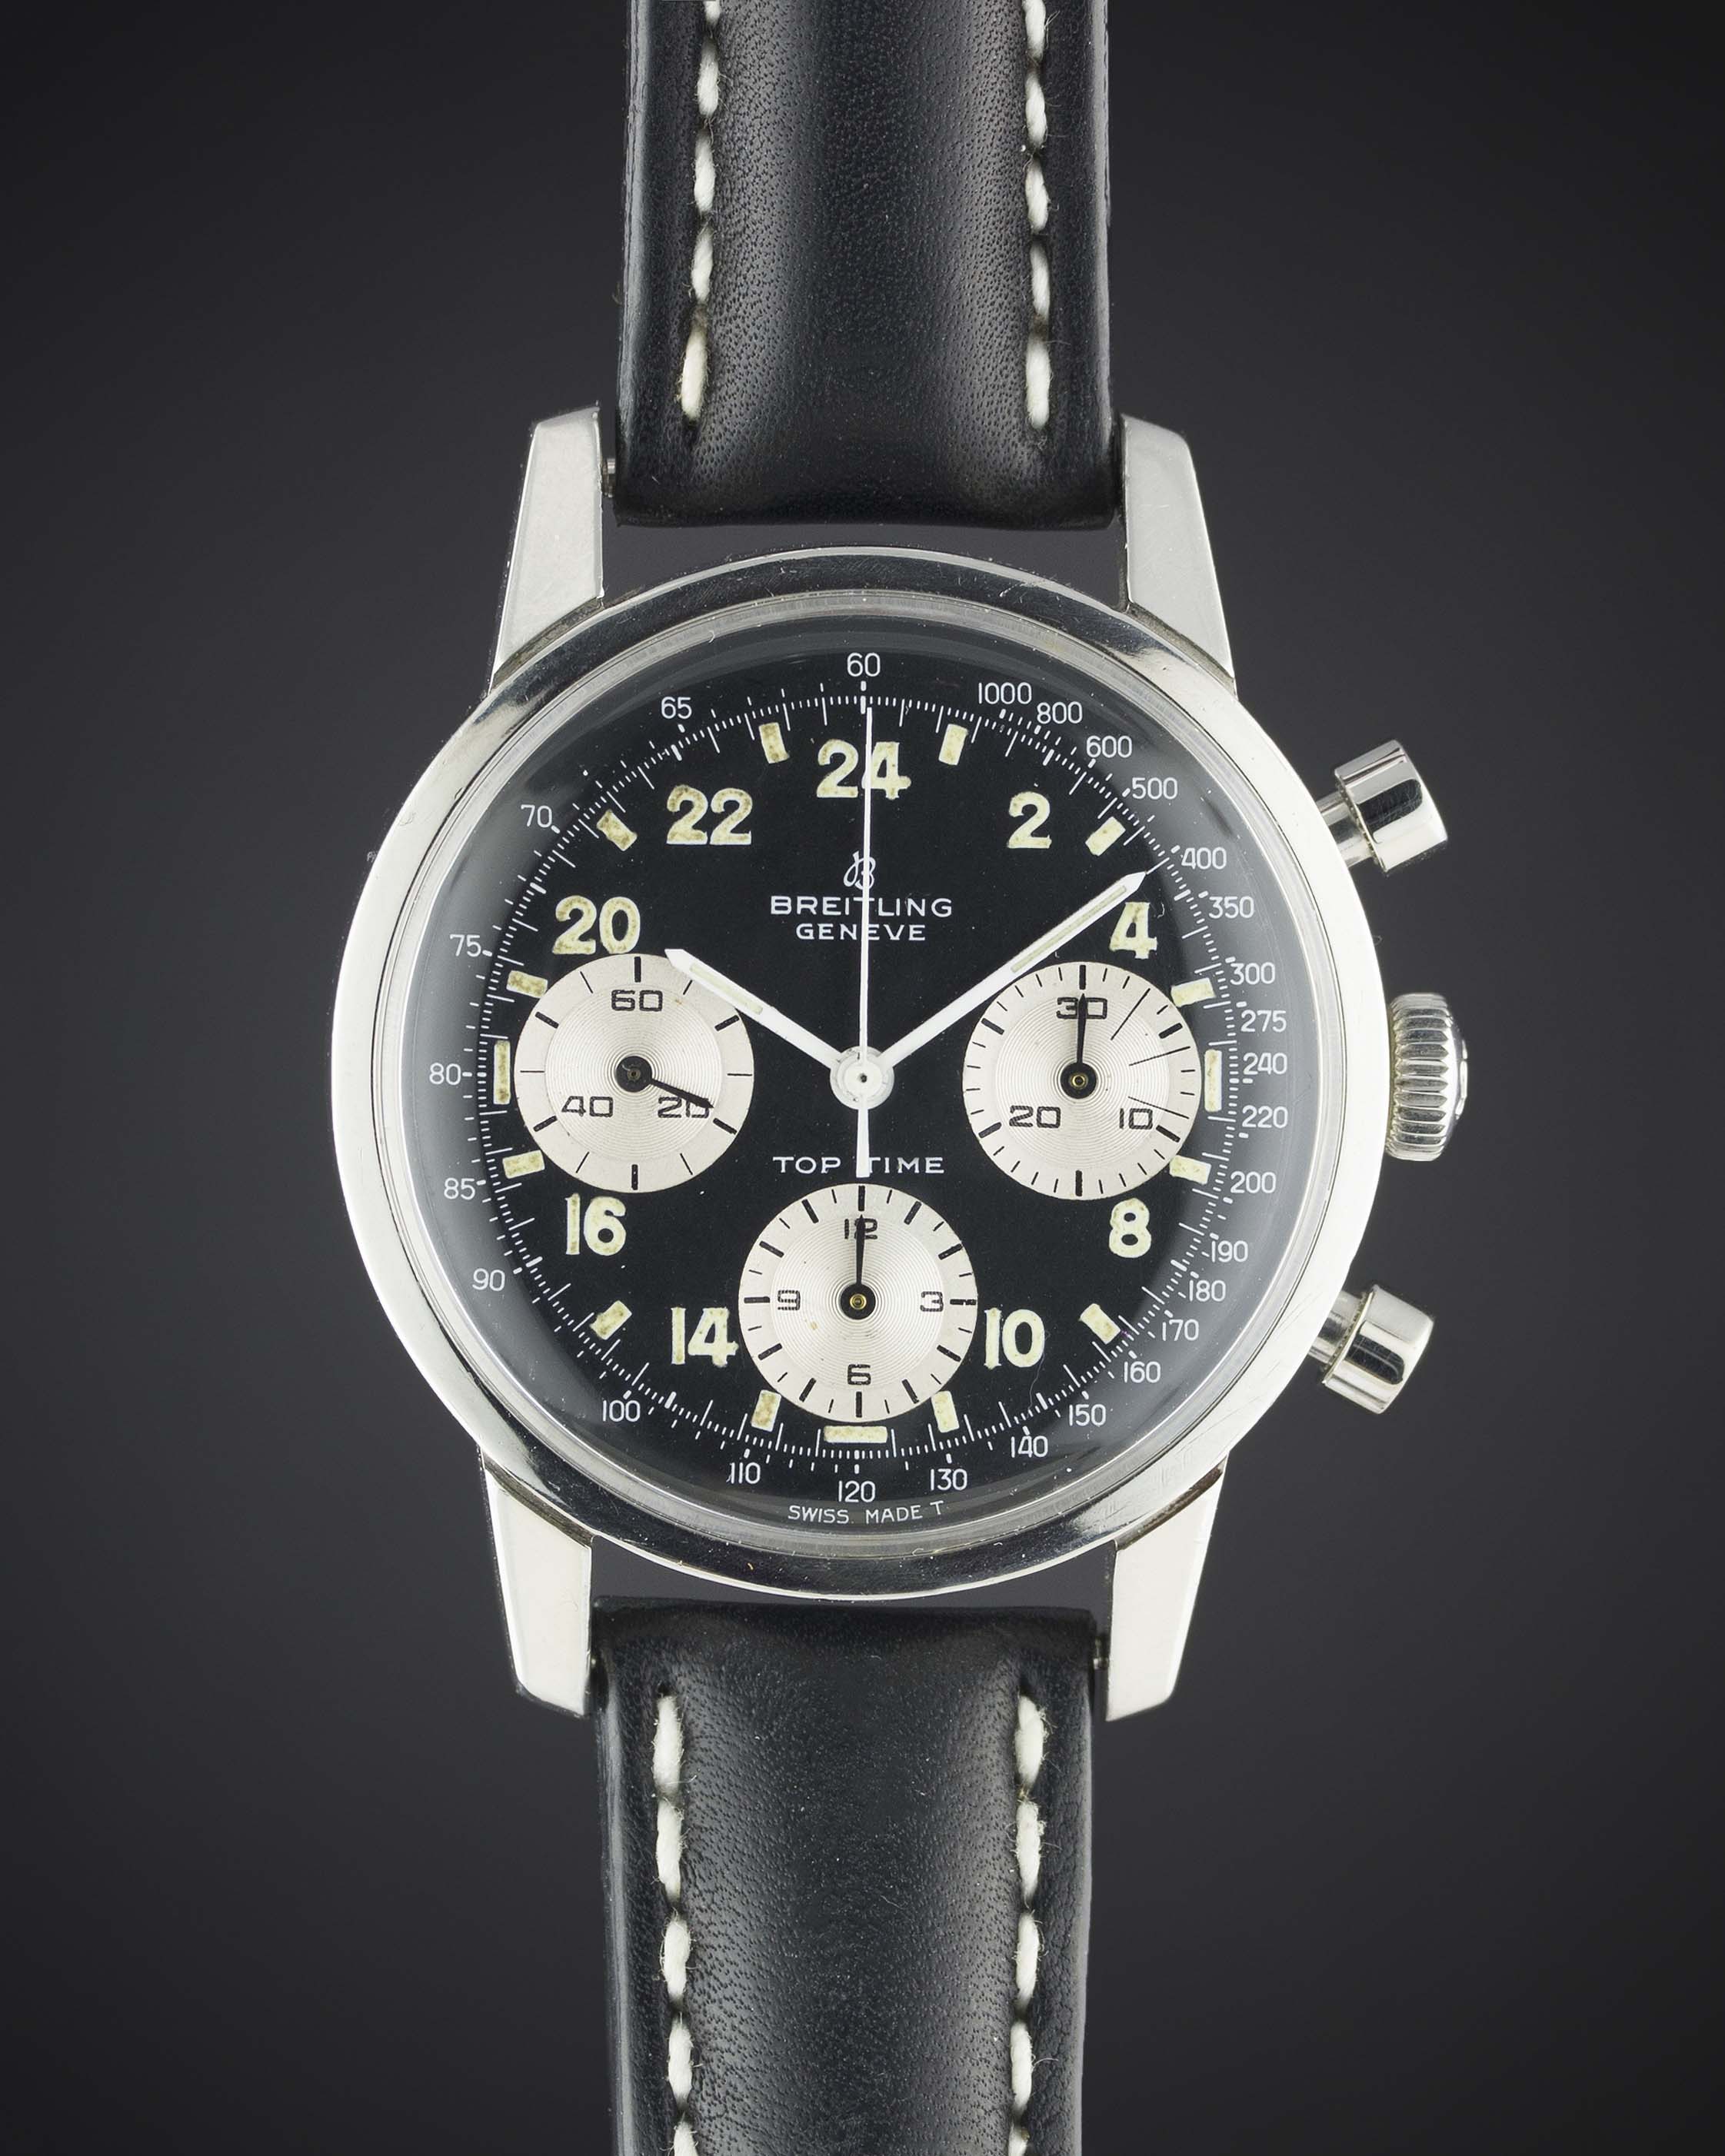 A RARE GENTLEMAN'S STAINLESS STEEL BREITLING TOP TIME 24 HOUR CHRONOGRAPH WRIST WATCH CIRCA 1968, - Image 2 of 12